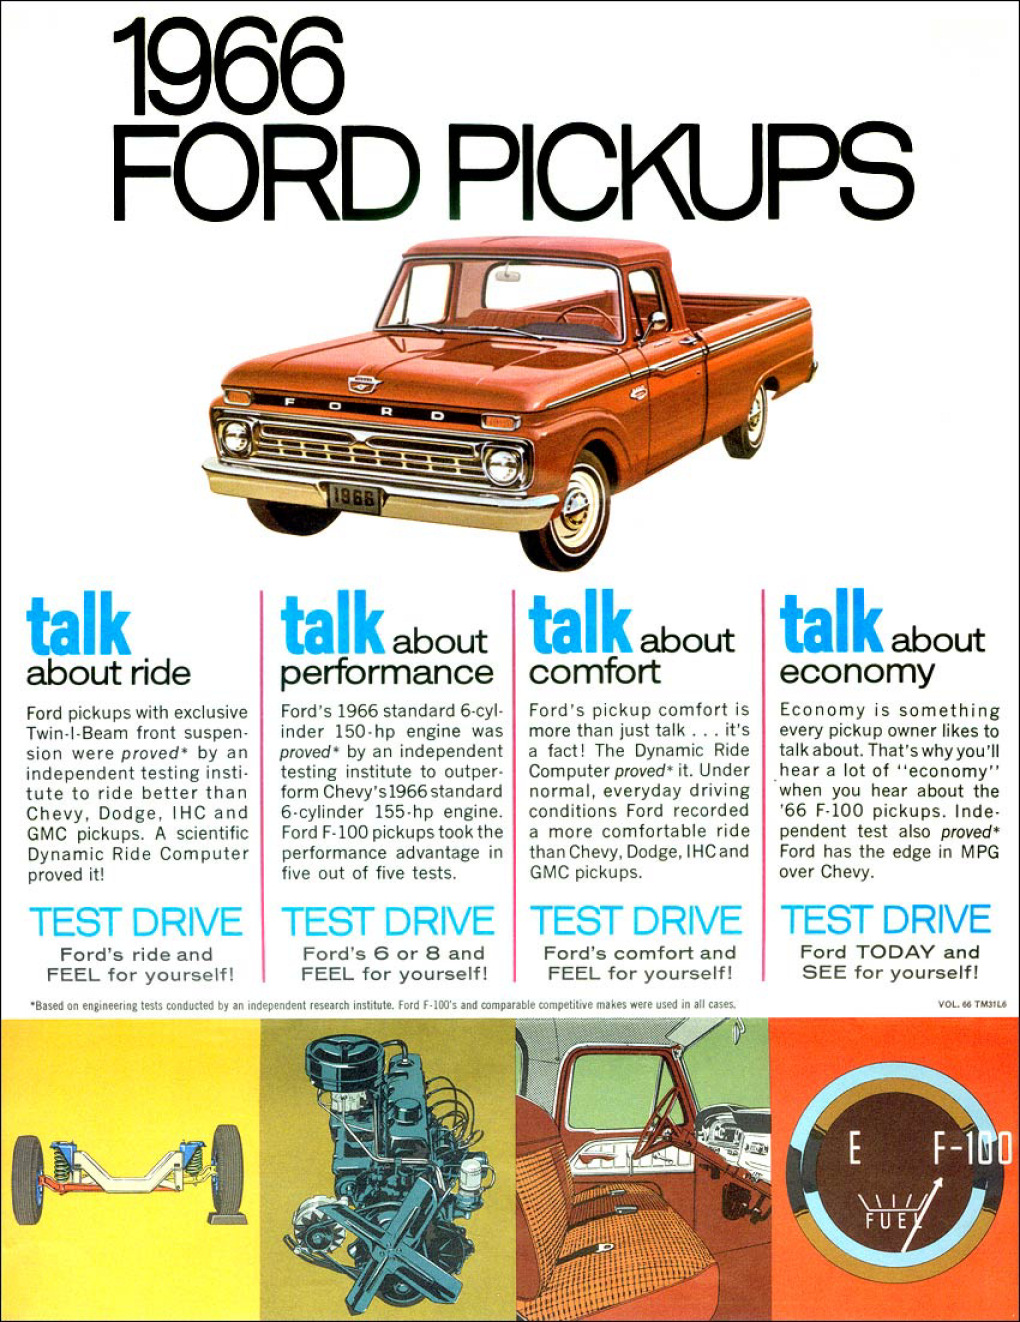 1966_Ford_Pickup_Mailer-02